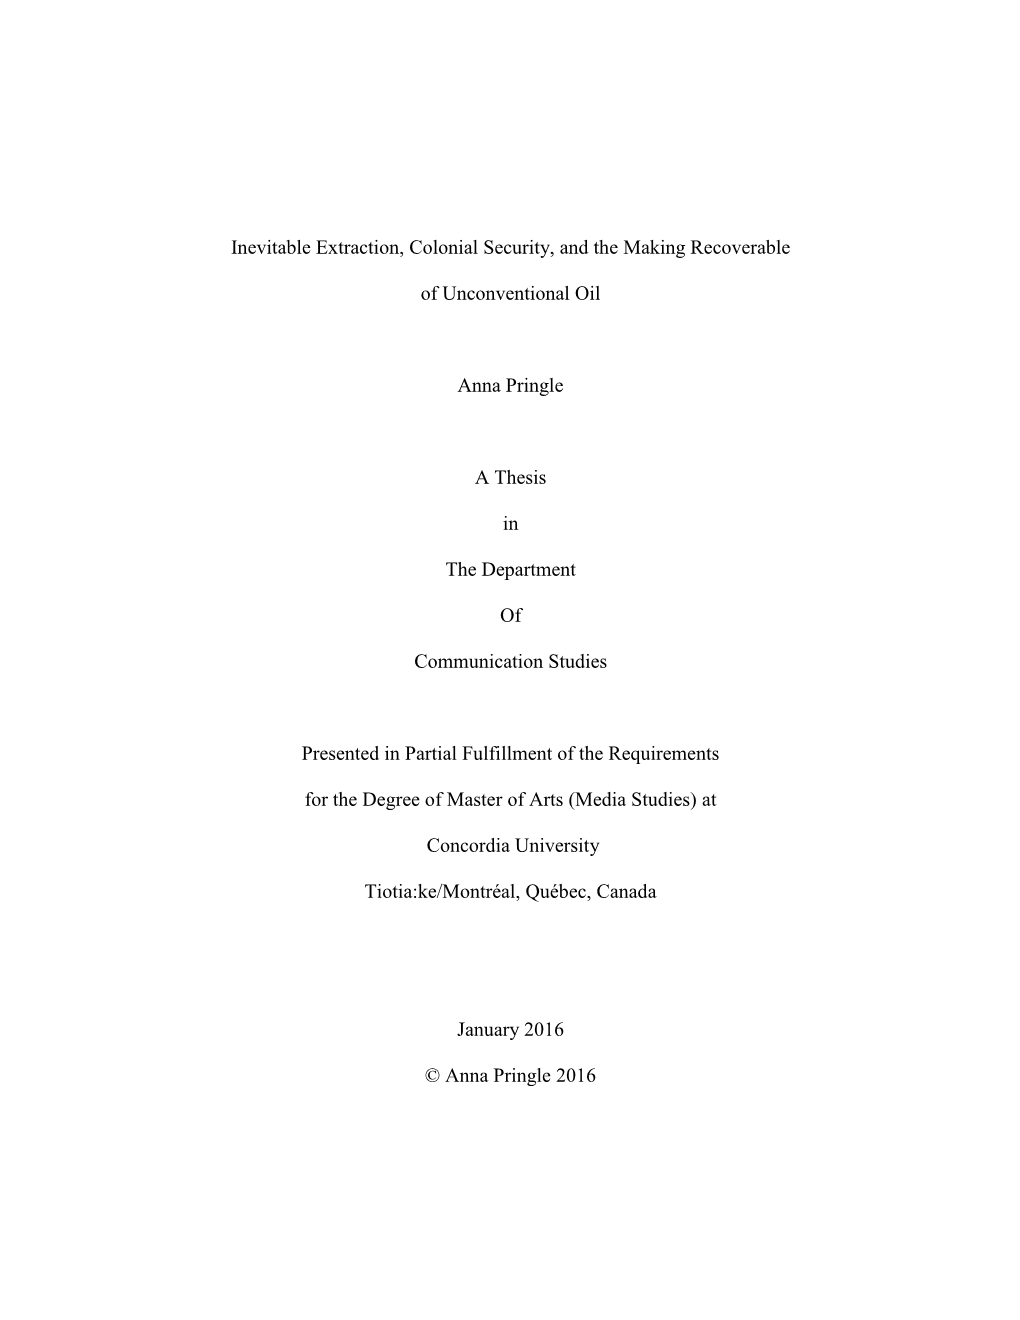 Inevitable Extraction, Colonial Security, and the Making Recoverable of Unconventional Oil Anna Pringle a Thesis in the Depar